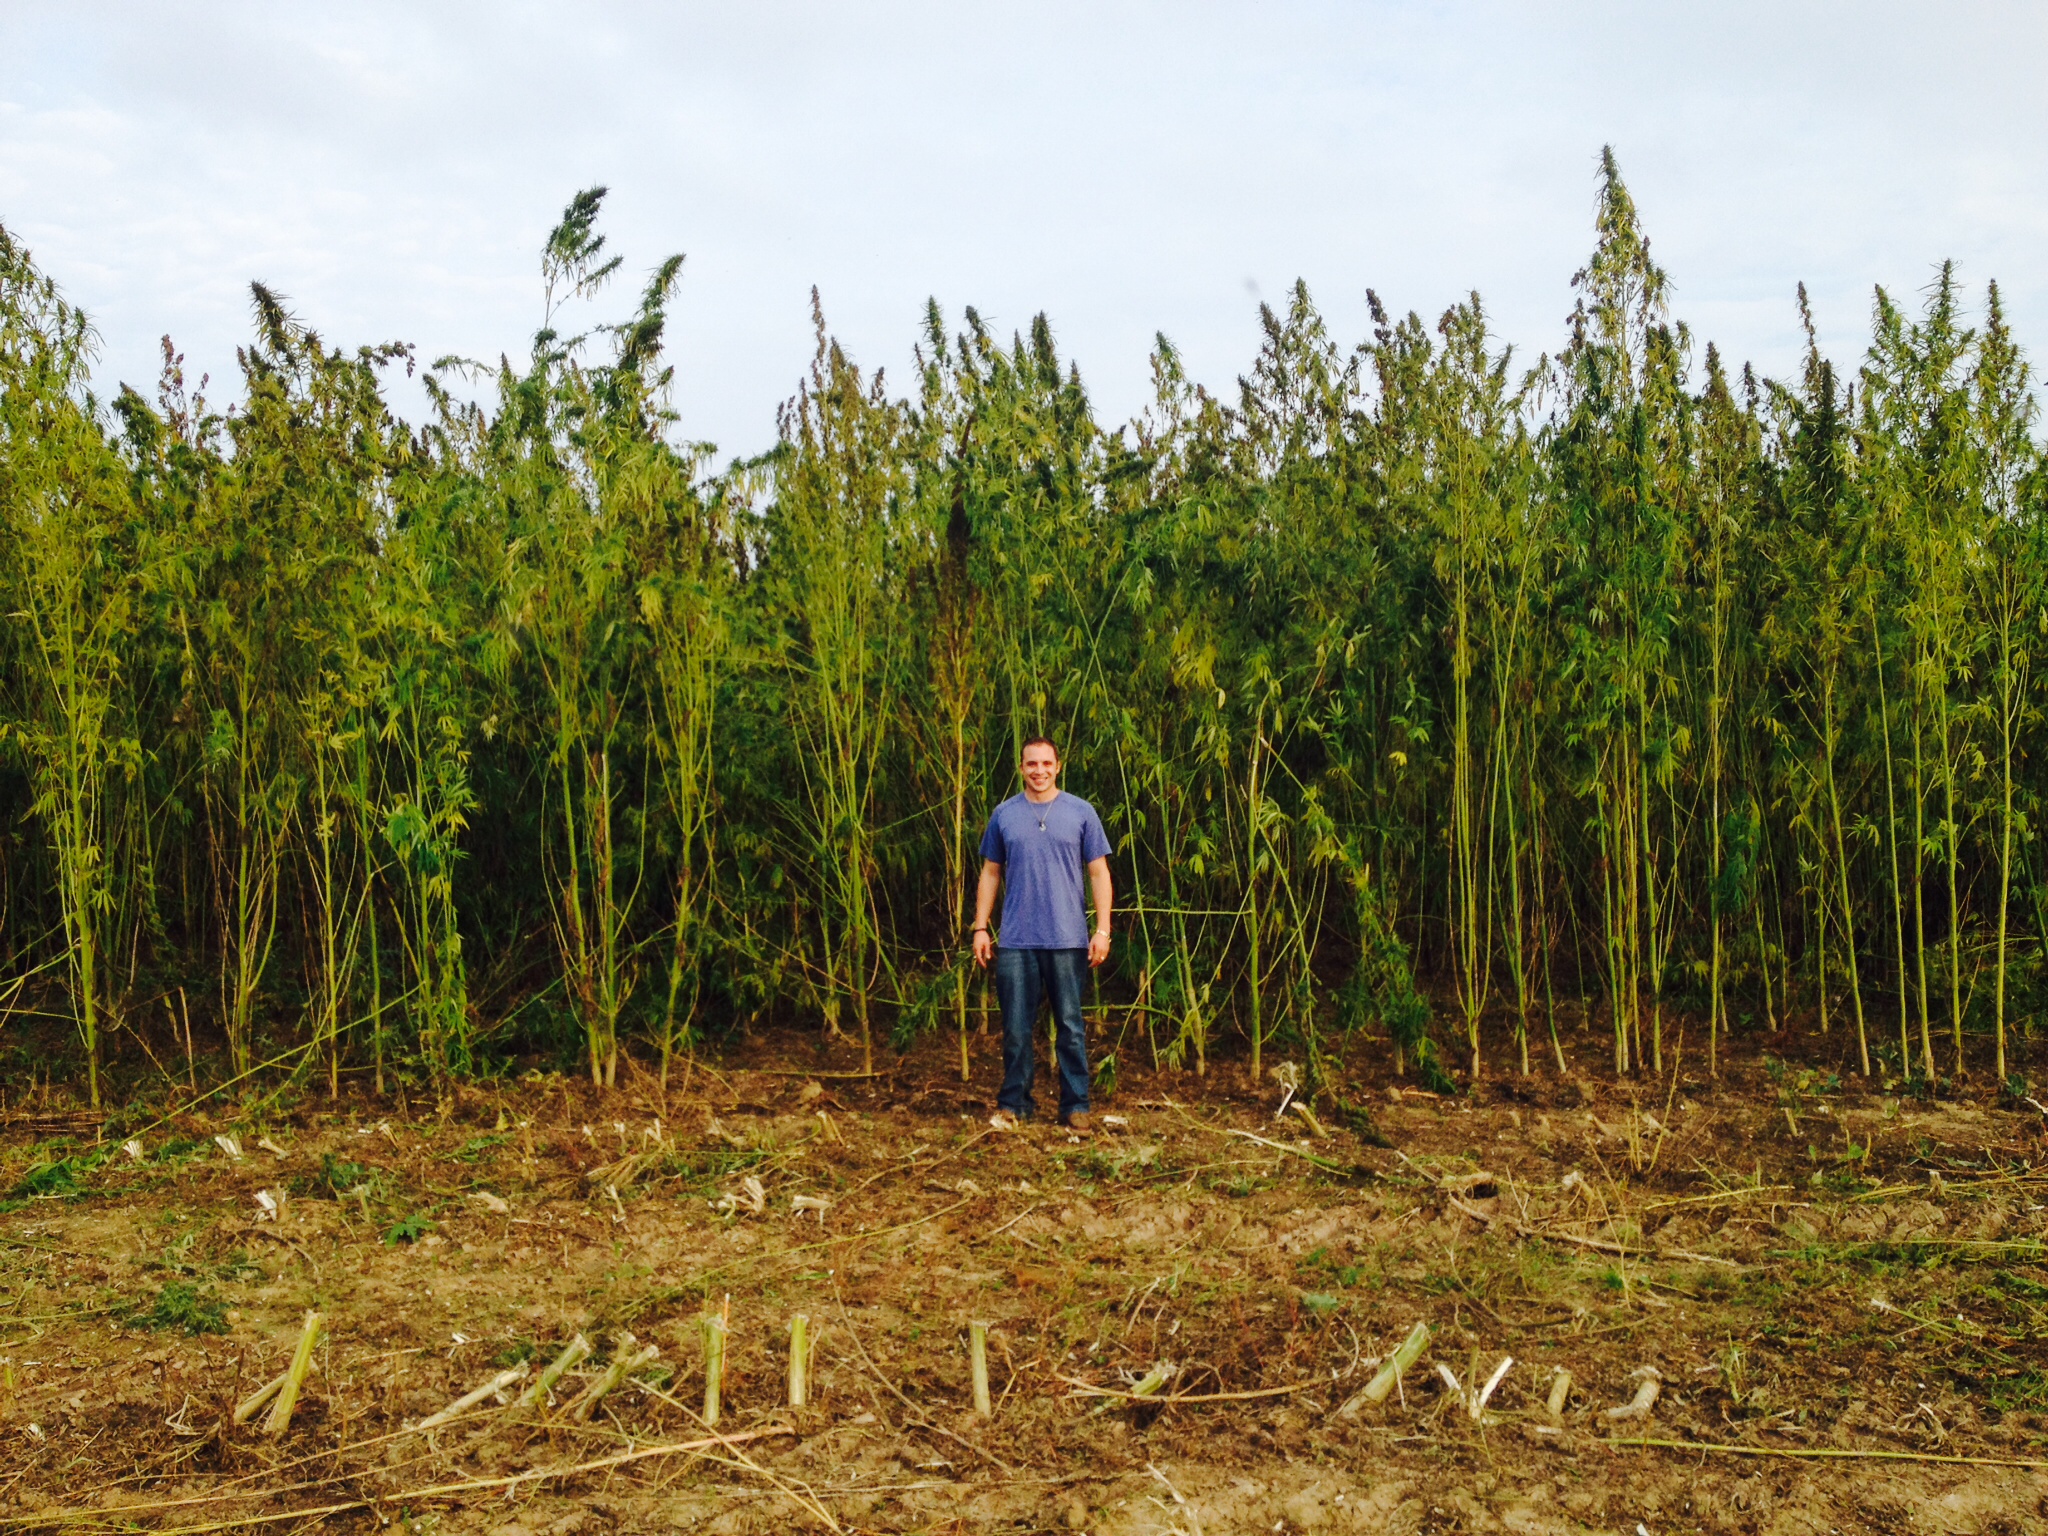 Bluebird's founder and CEO, Brandon Beatty, measuring up against their enormous hemp crops.